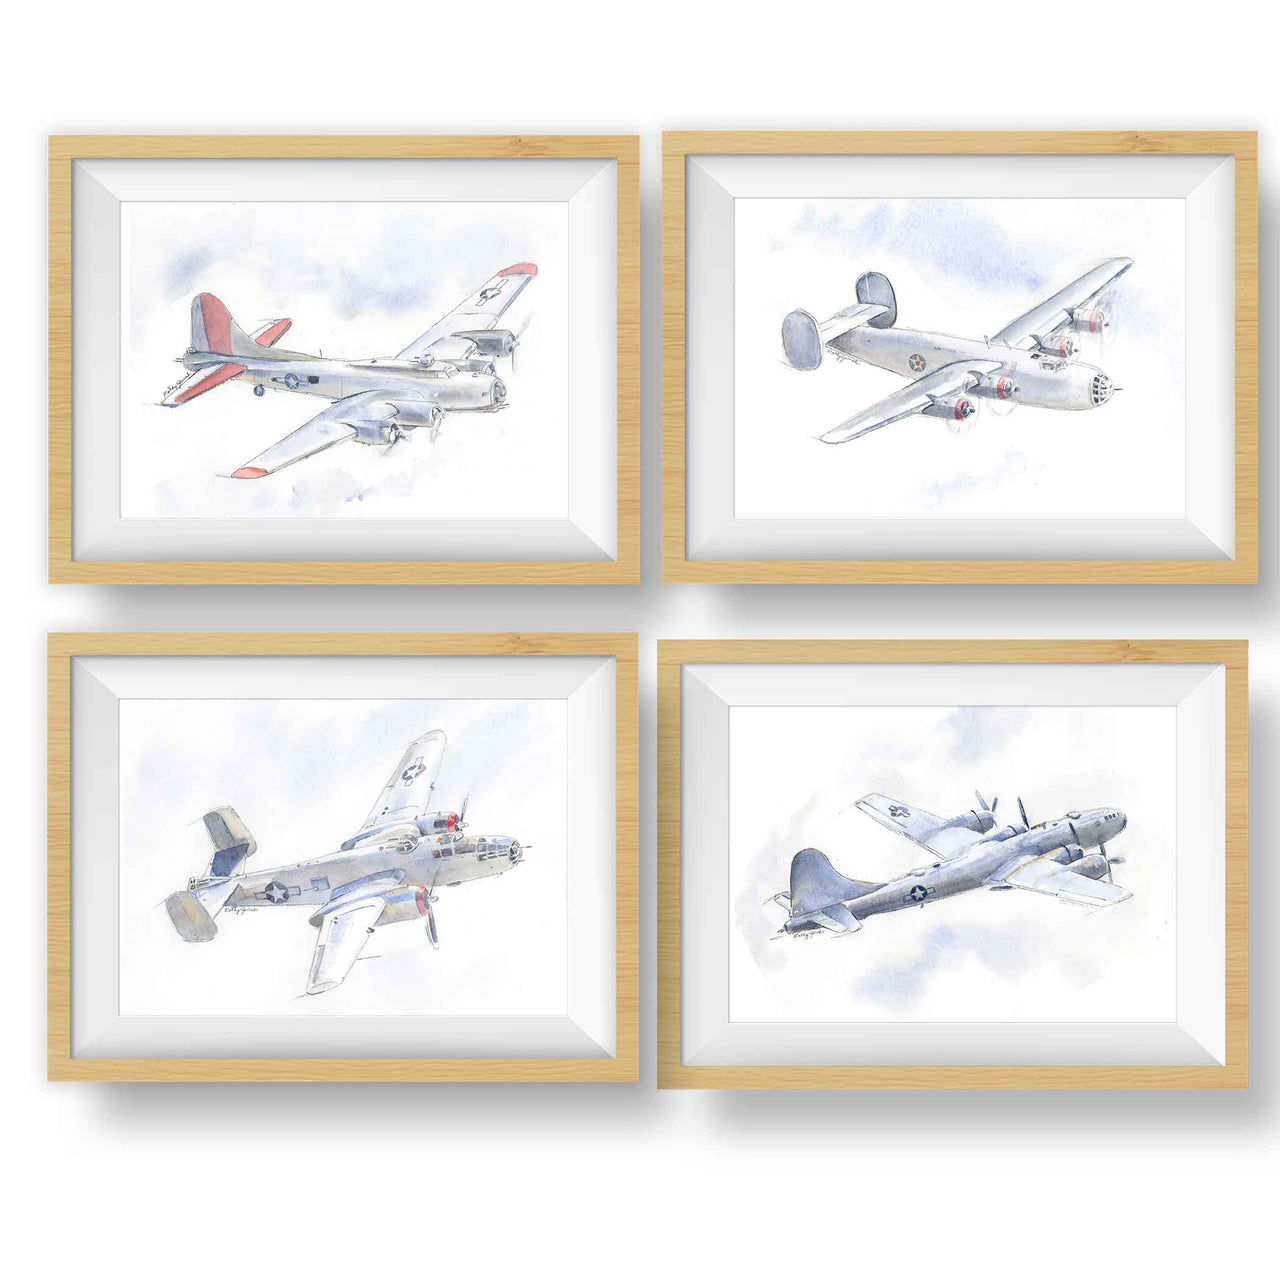 WWII Bomber Airplane Prints